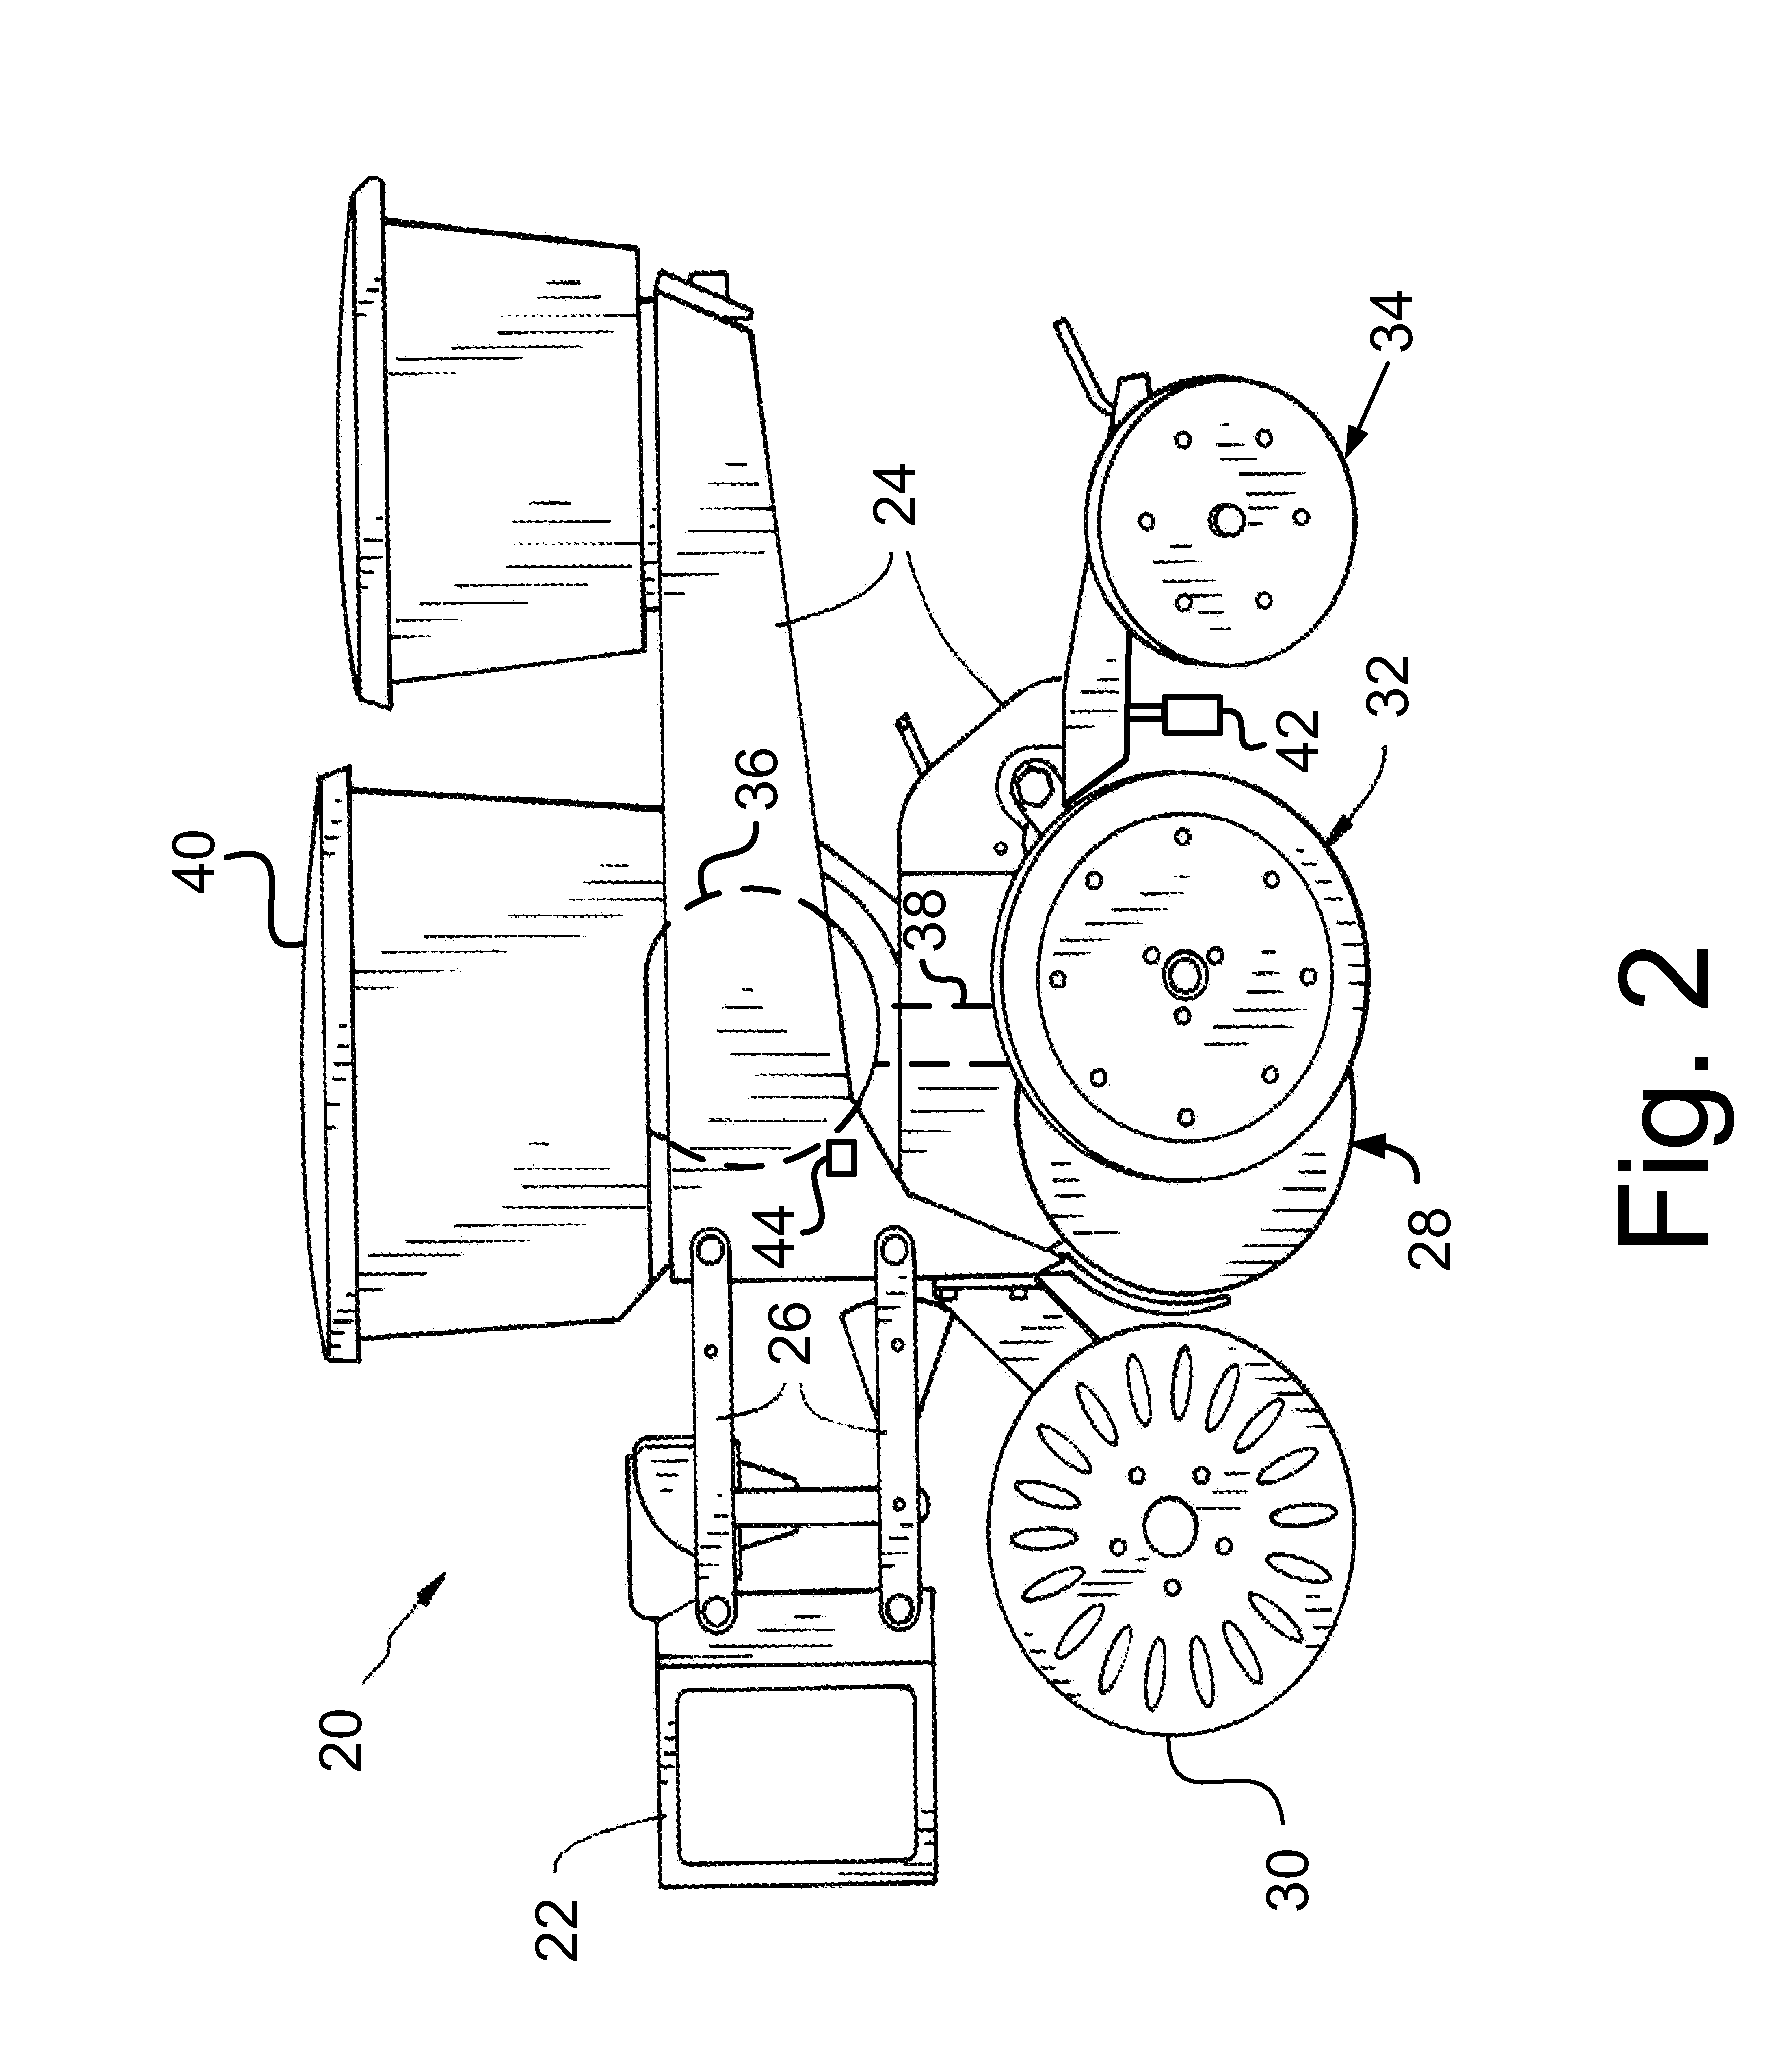 In-ground seed spacing monitoring system for use in an agricultural seeder